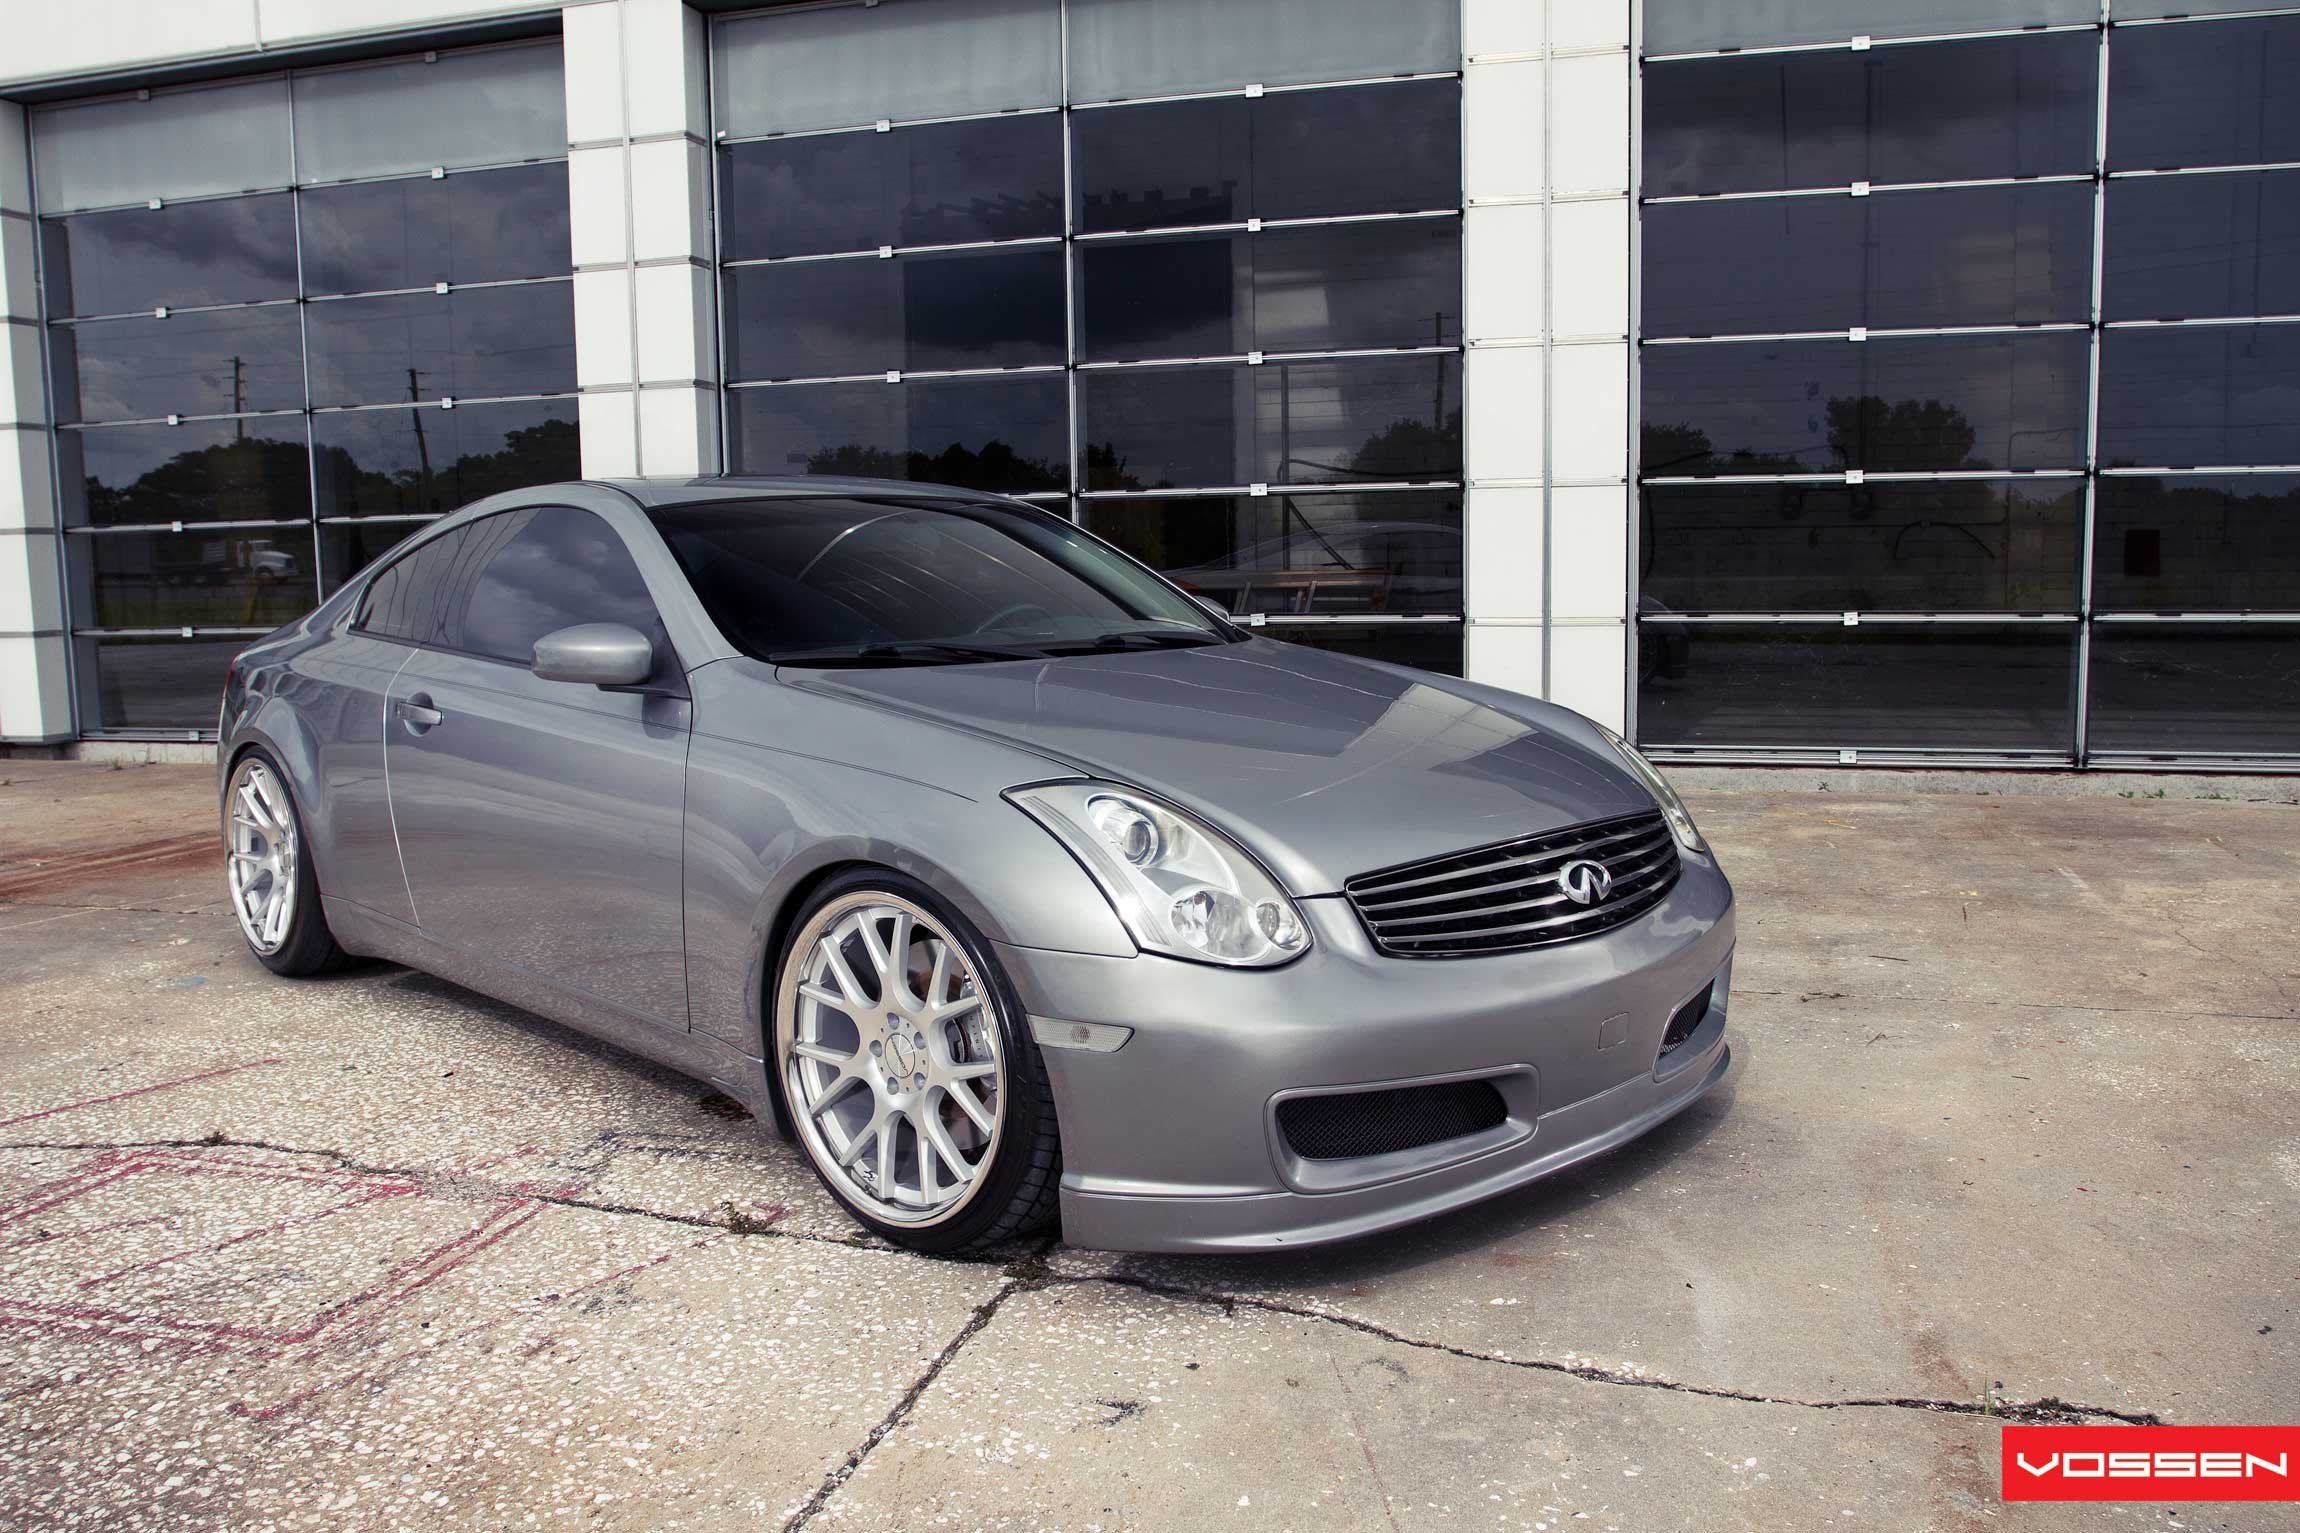 Gray Metallic Infiniti G35 with Crystal Clear Headlights - Photo by Vossen